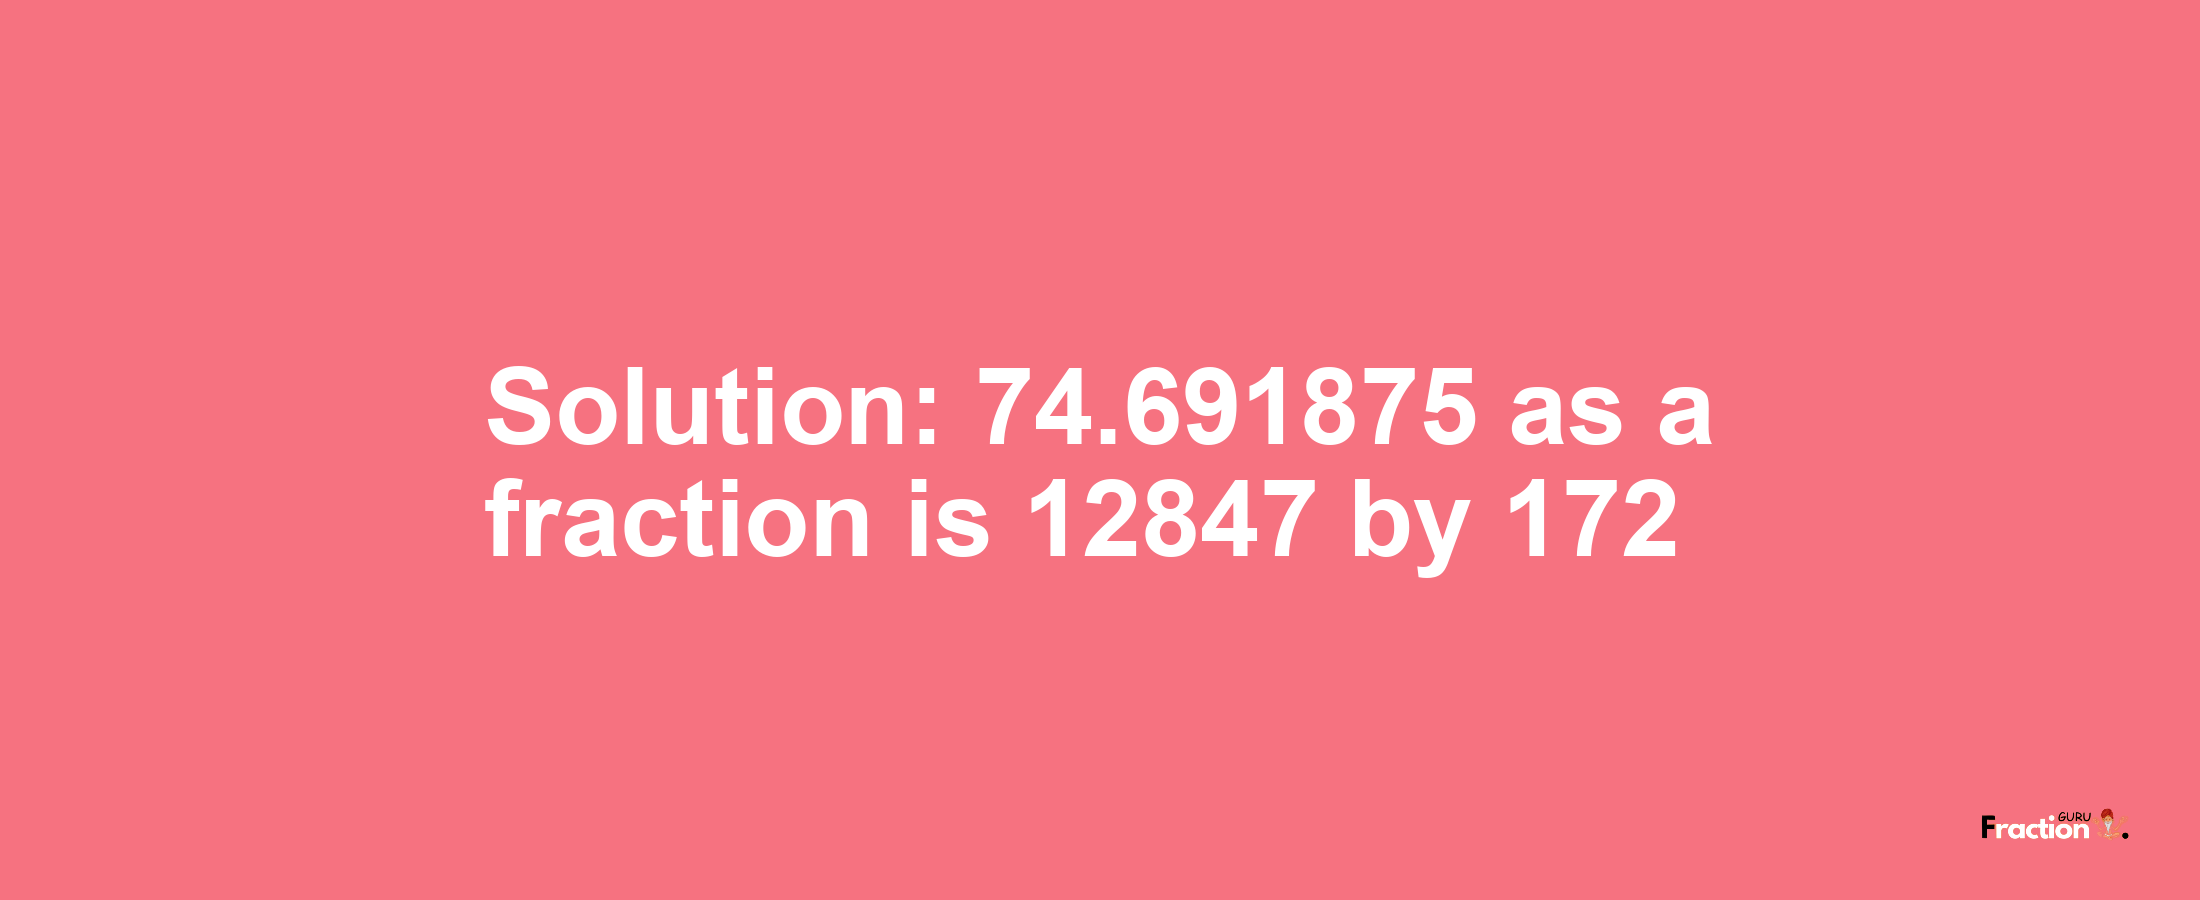 Solution:74.691875 as a fraction is 12847/172